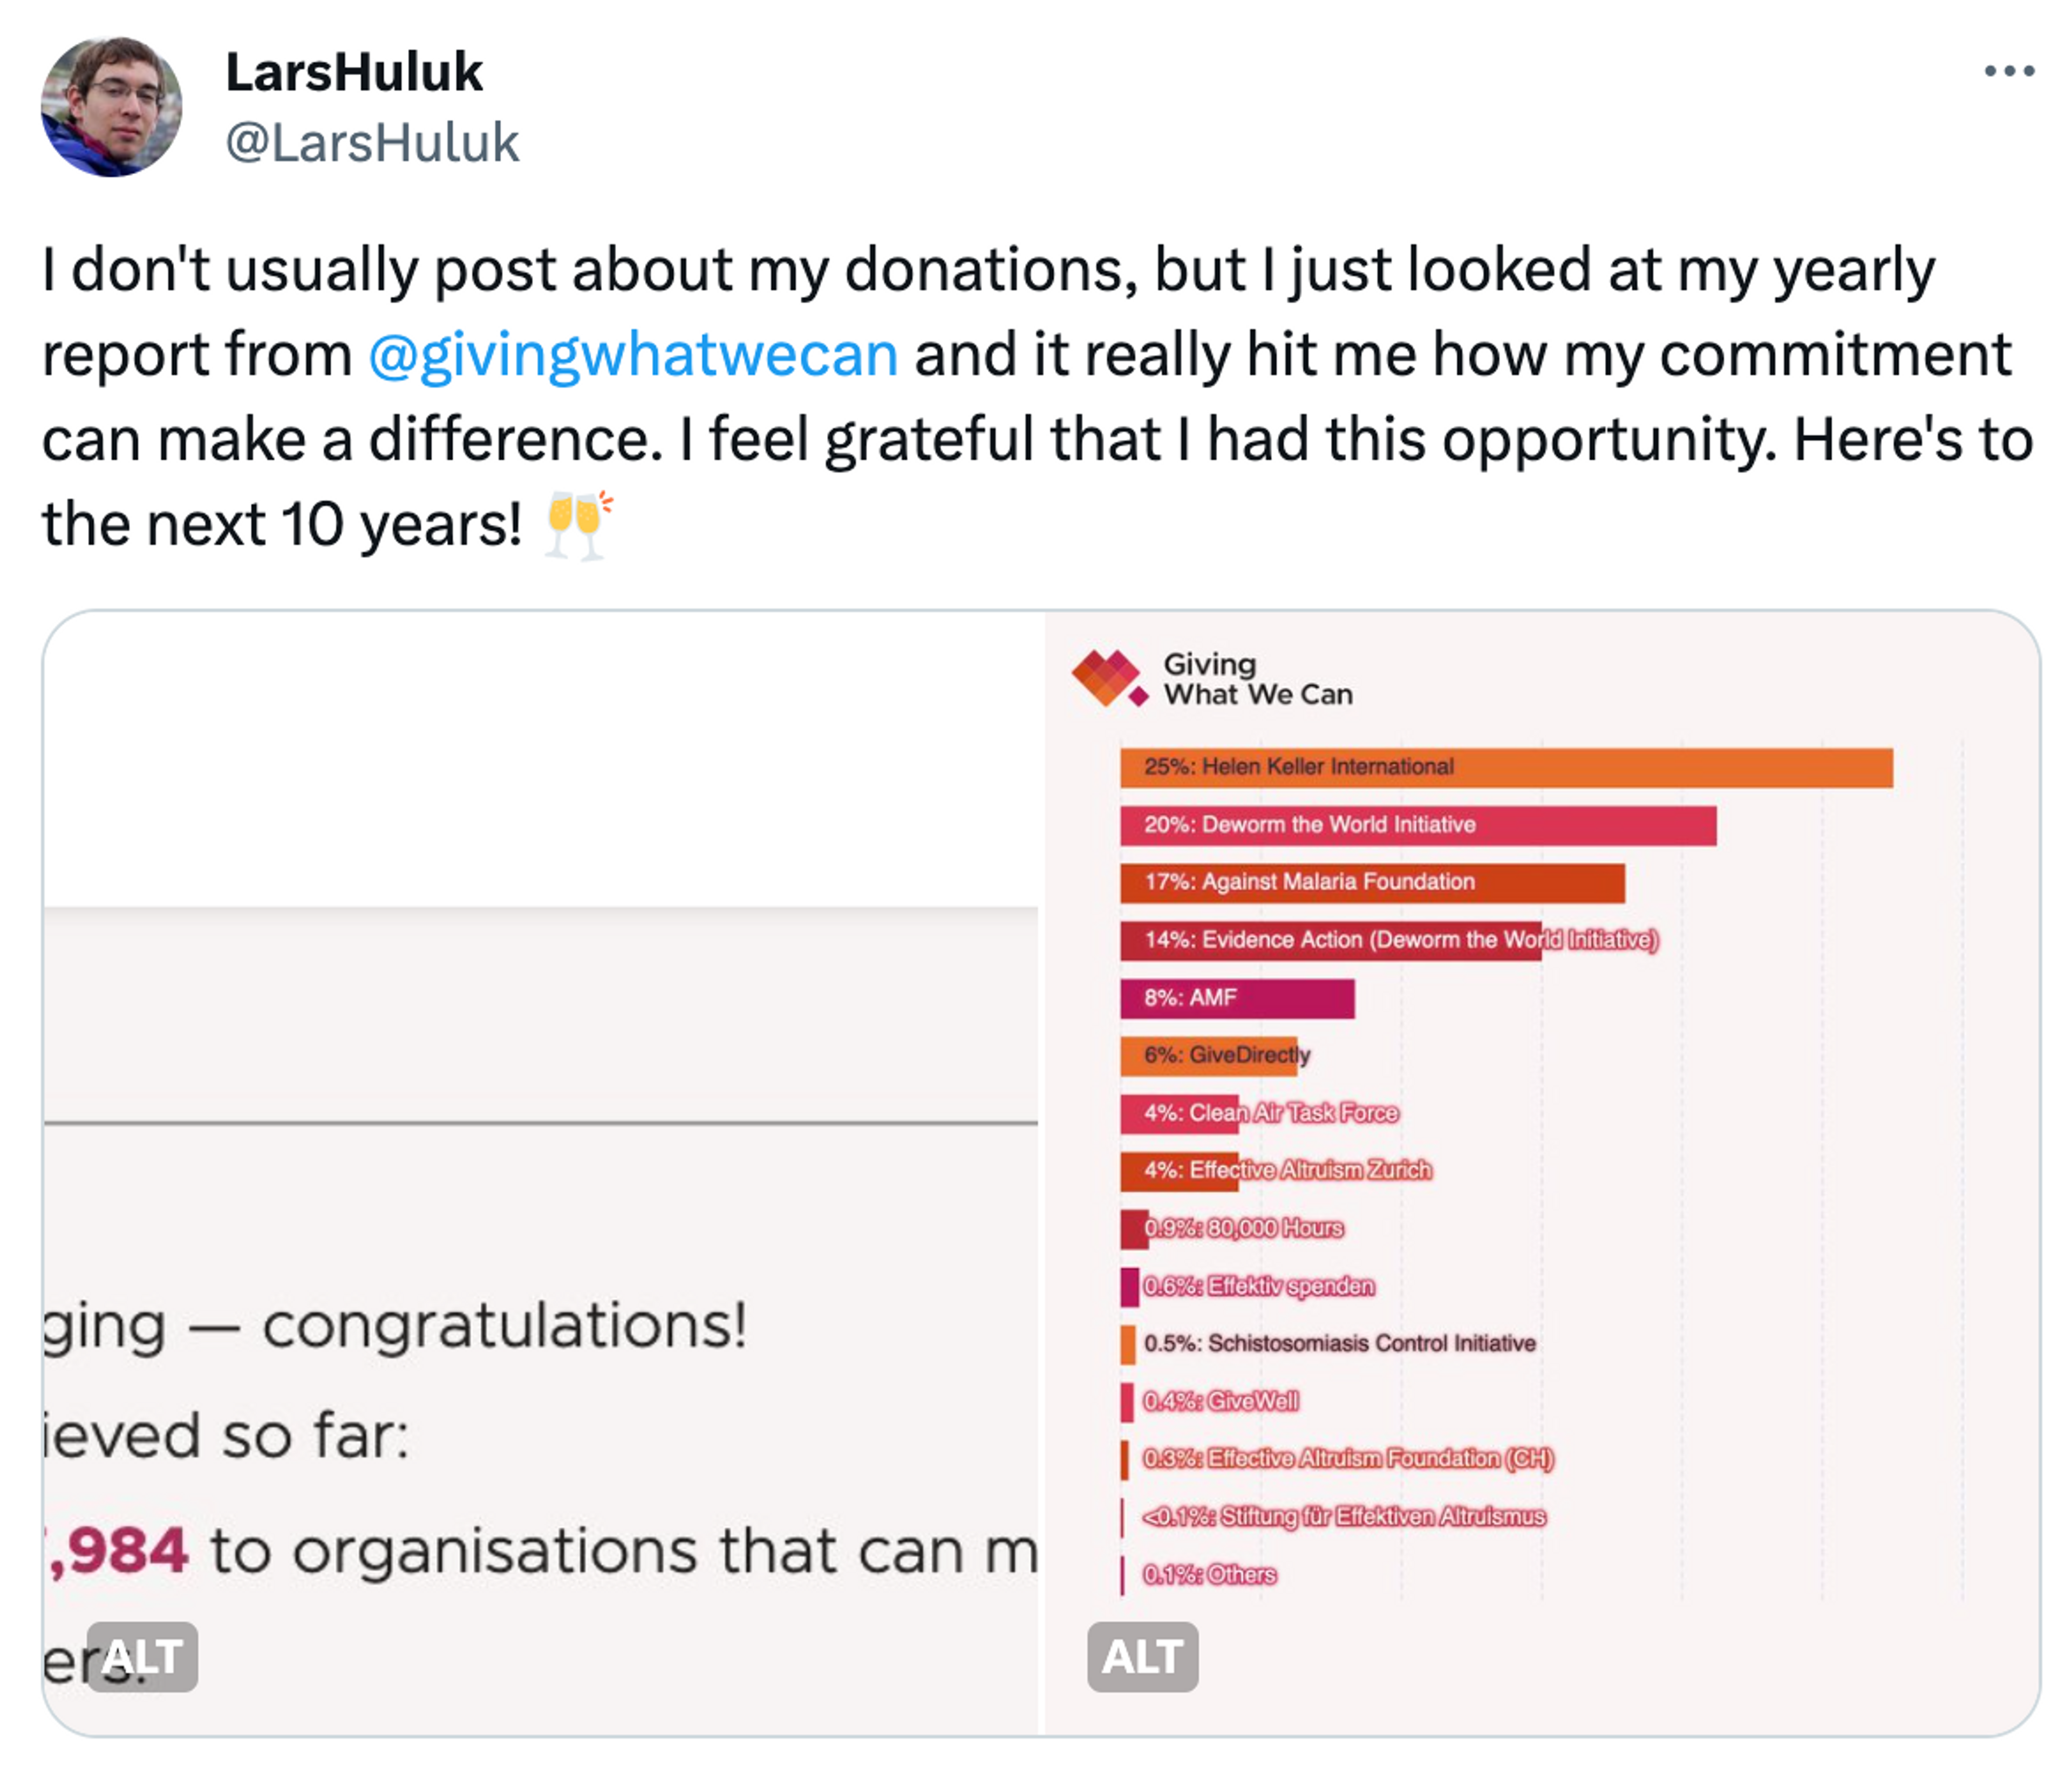 A tweet from @LarsHuluk about the impact his donations via the Giving What We Can pledge.